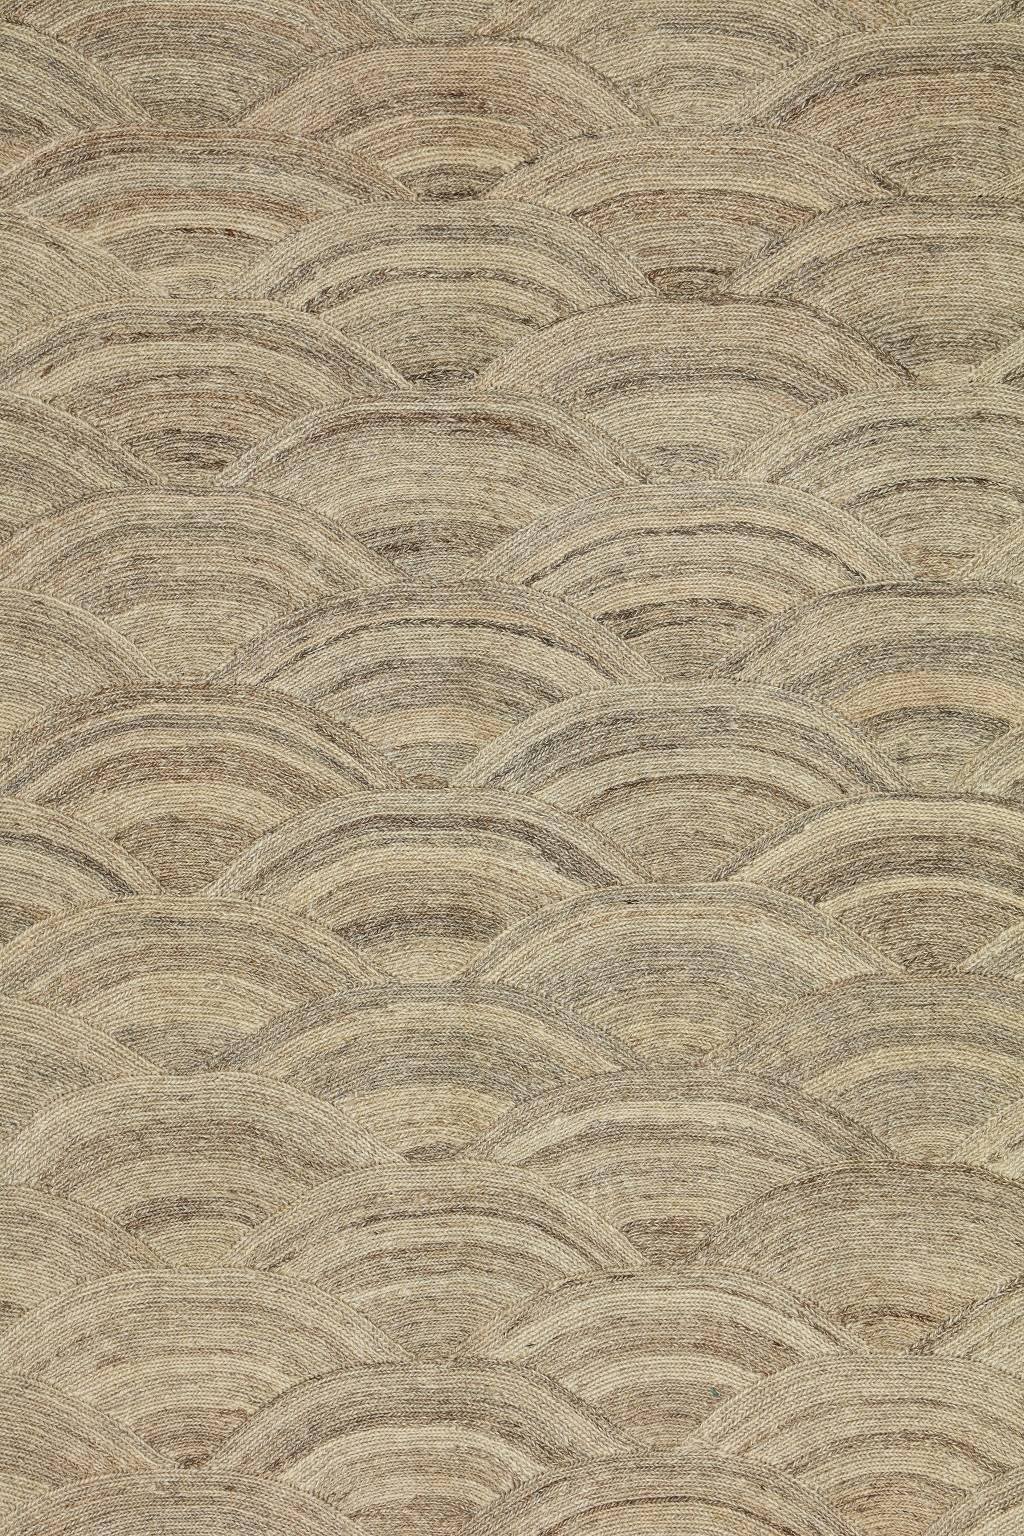 This Orley Shabahang signature flat-weave carpet was created using pure handspun wool, with undyed wools exhibiting the natural colors of the sheep. The wool is of Orley Shabahang signature, derived from our own heard of Persian fat-tail sheep in